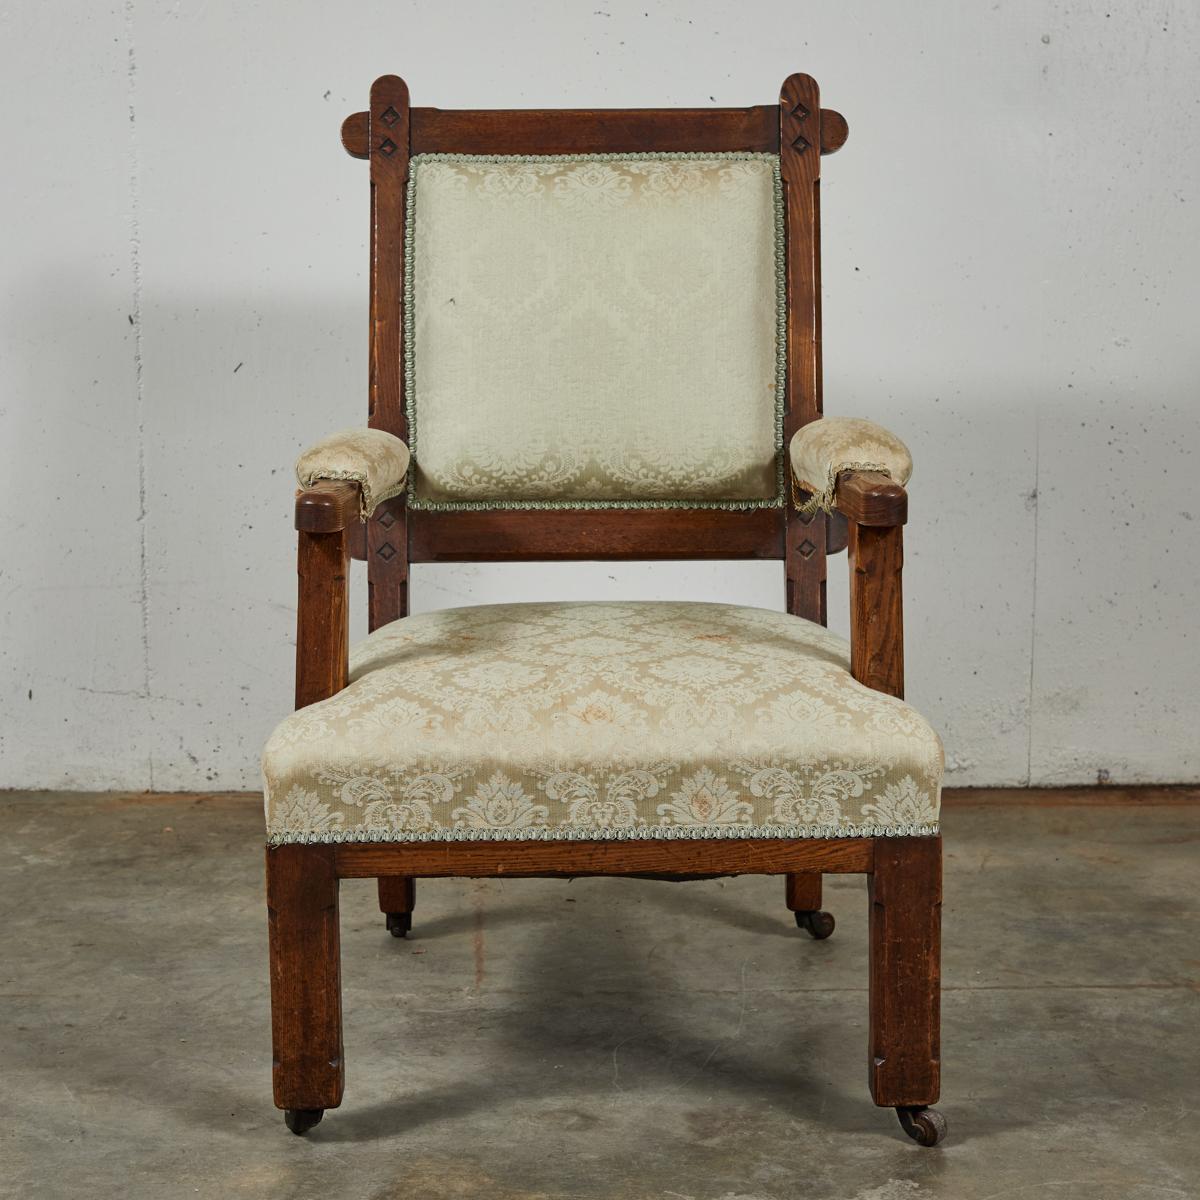 Early 20th century English Arts & Crafts oak chair.